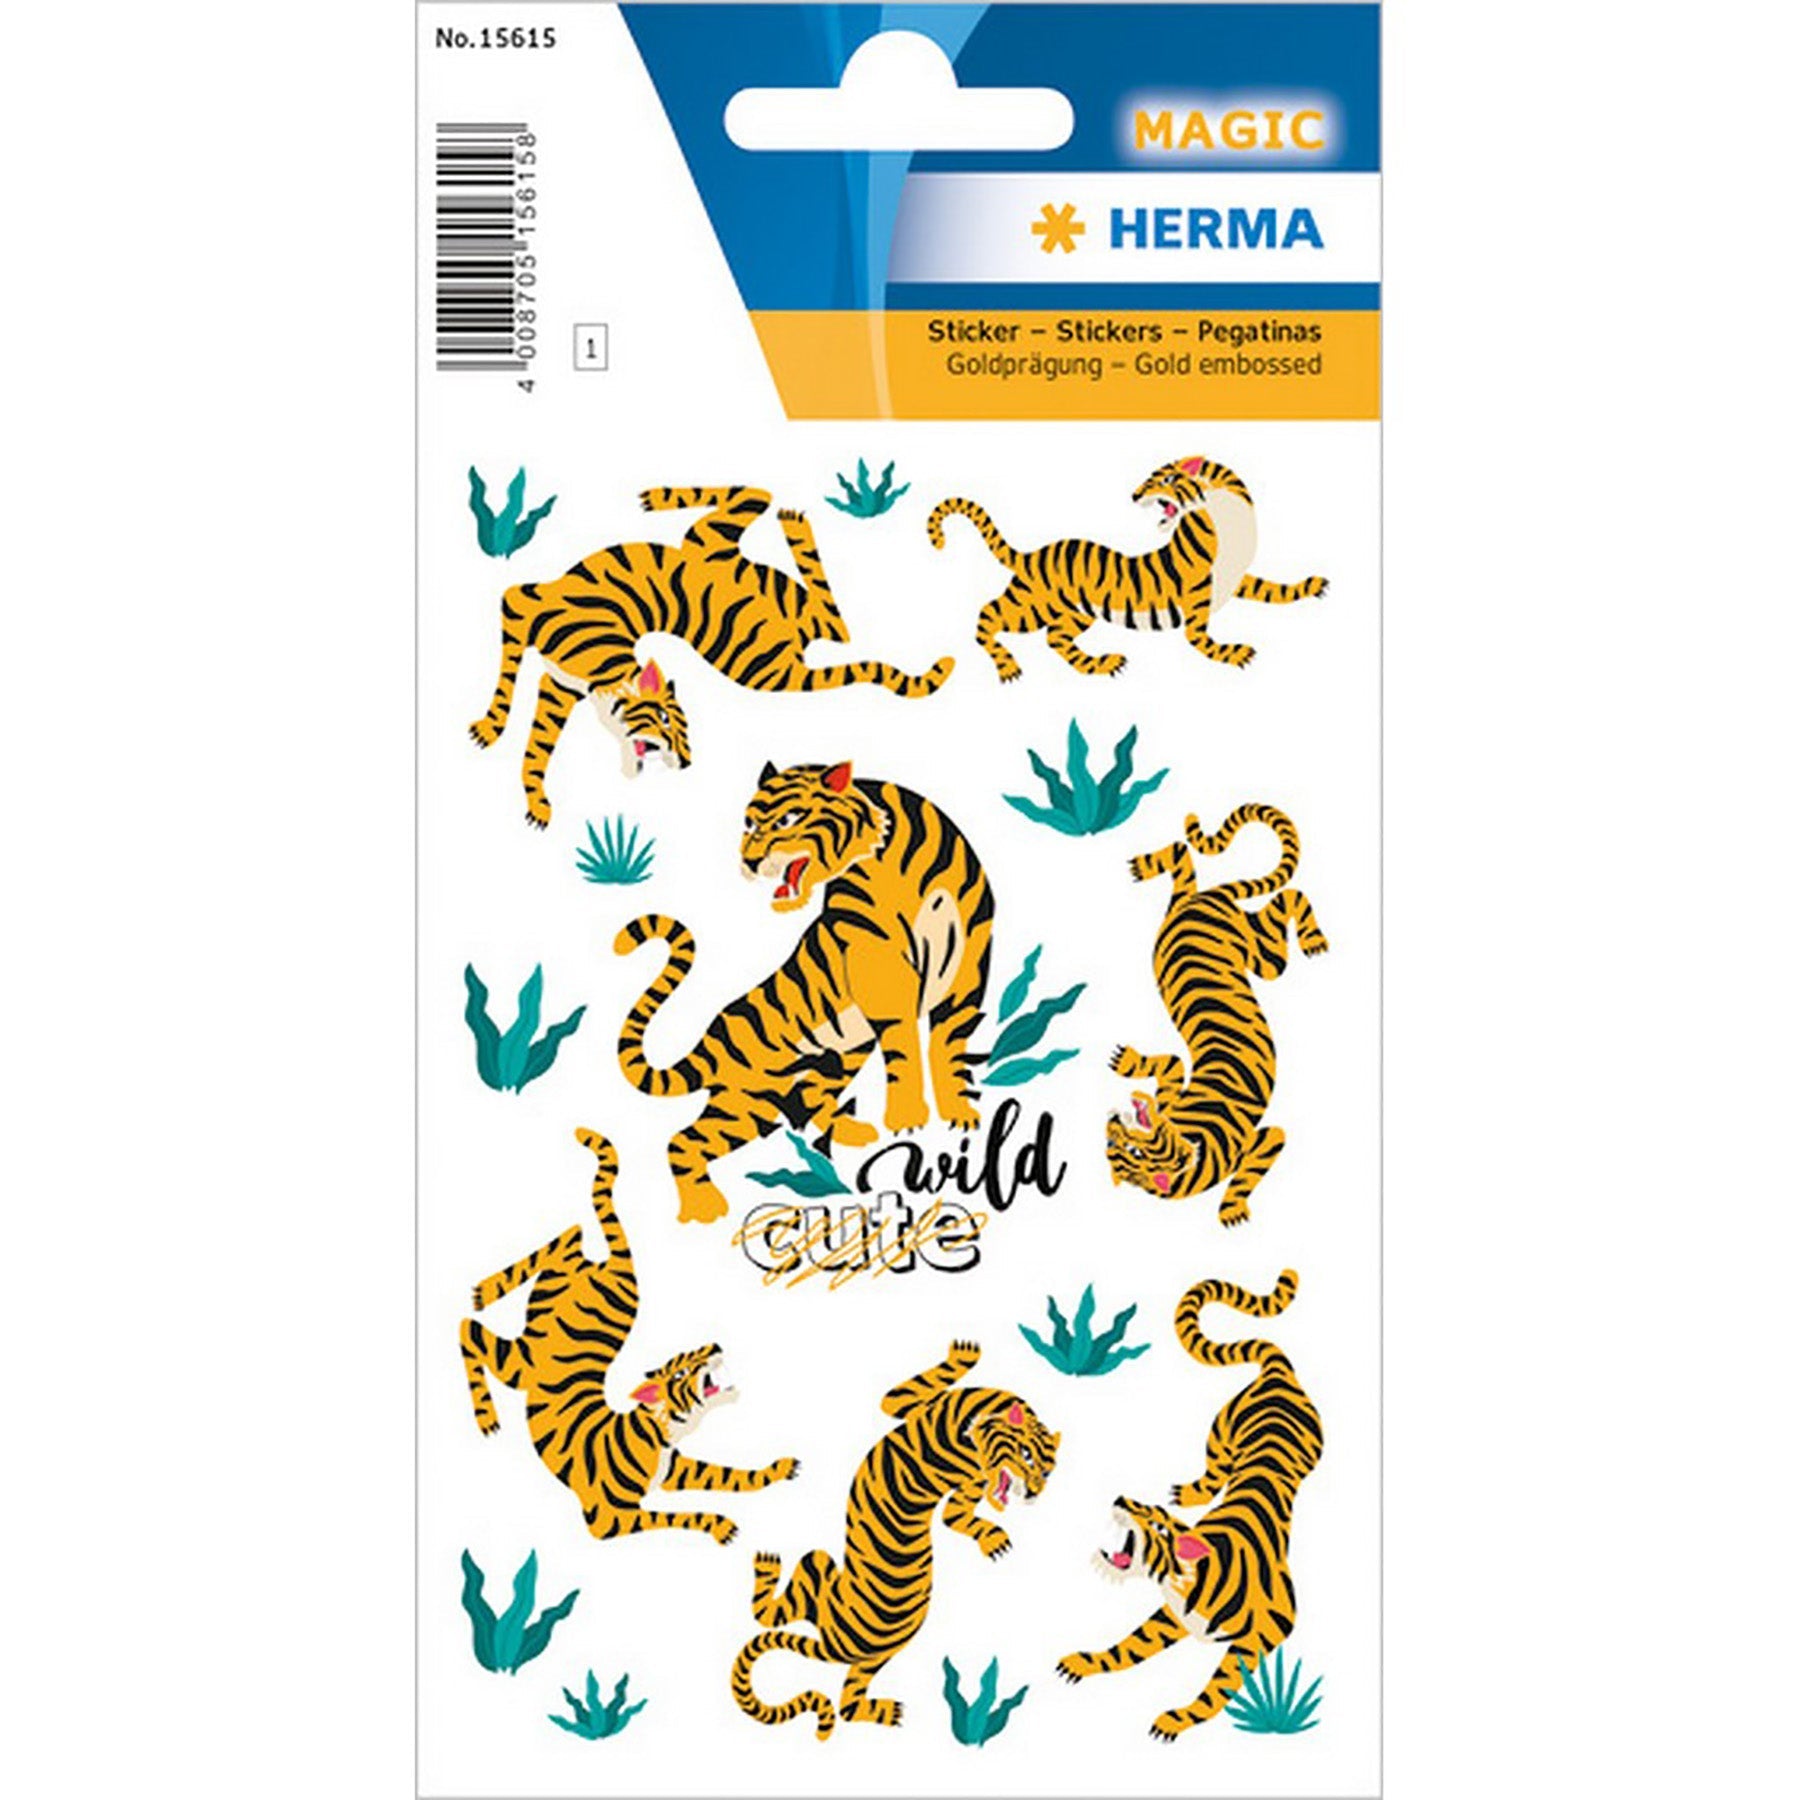 Herma Magic Stickers Wild Tiger Gold Embossed 4.75x3.1in Sheet